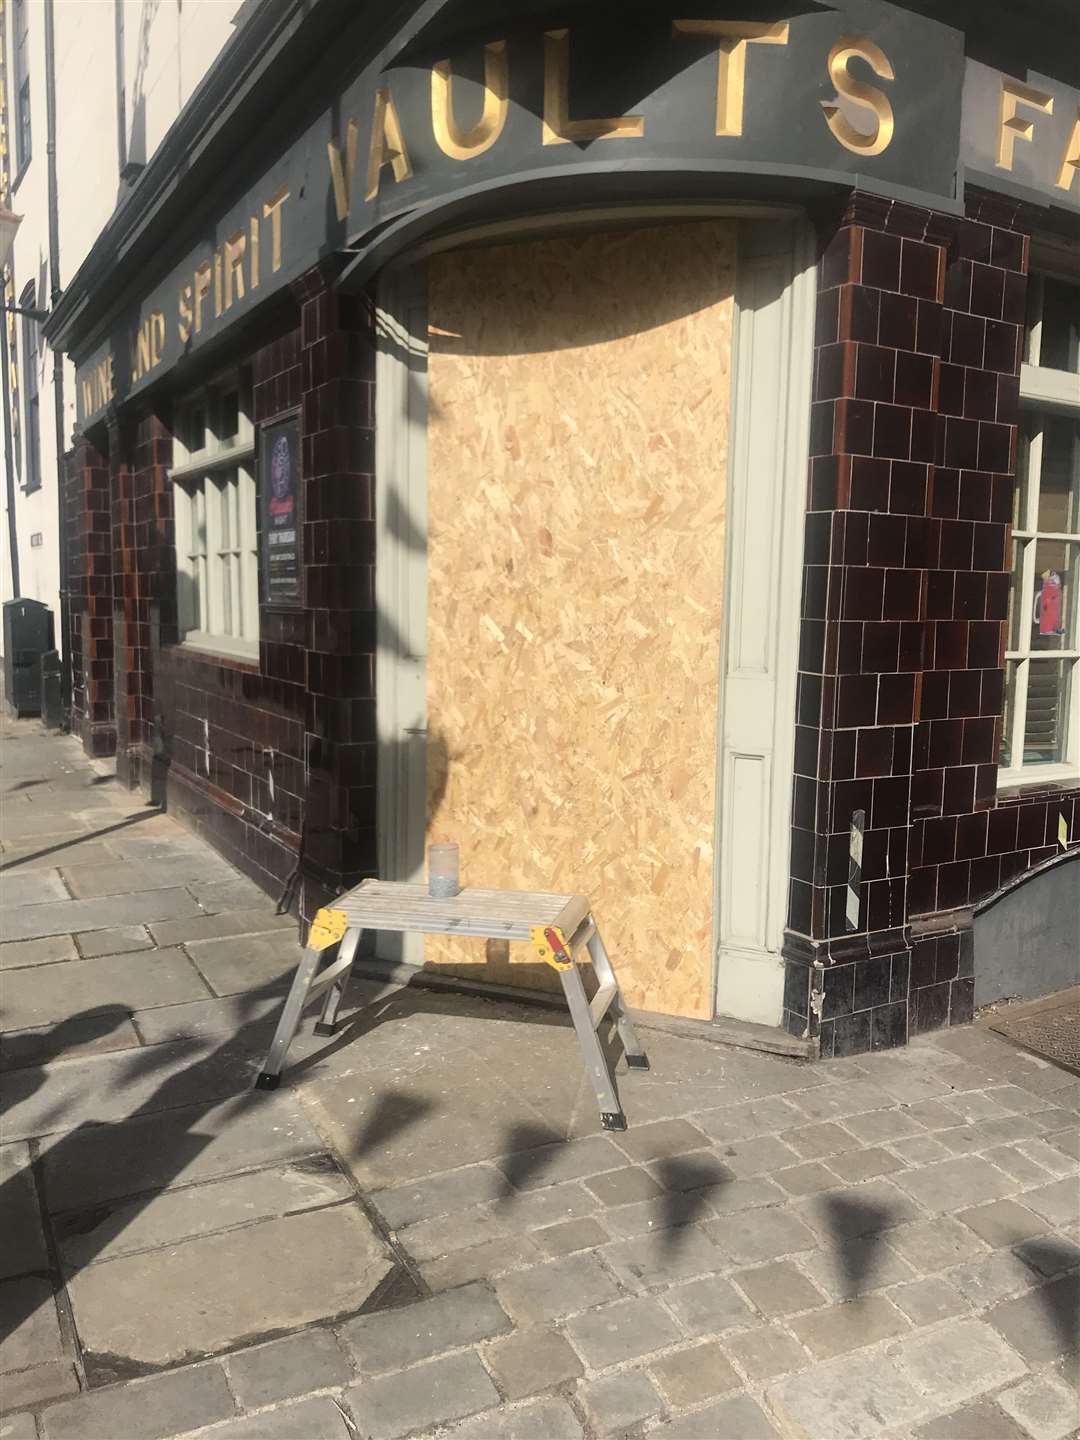 Boarded up pub door after raid which saw a man arrested on suspicion of drug dealing